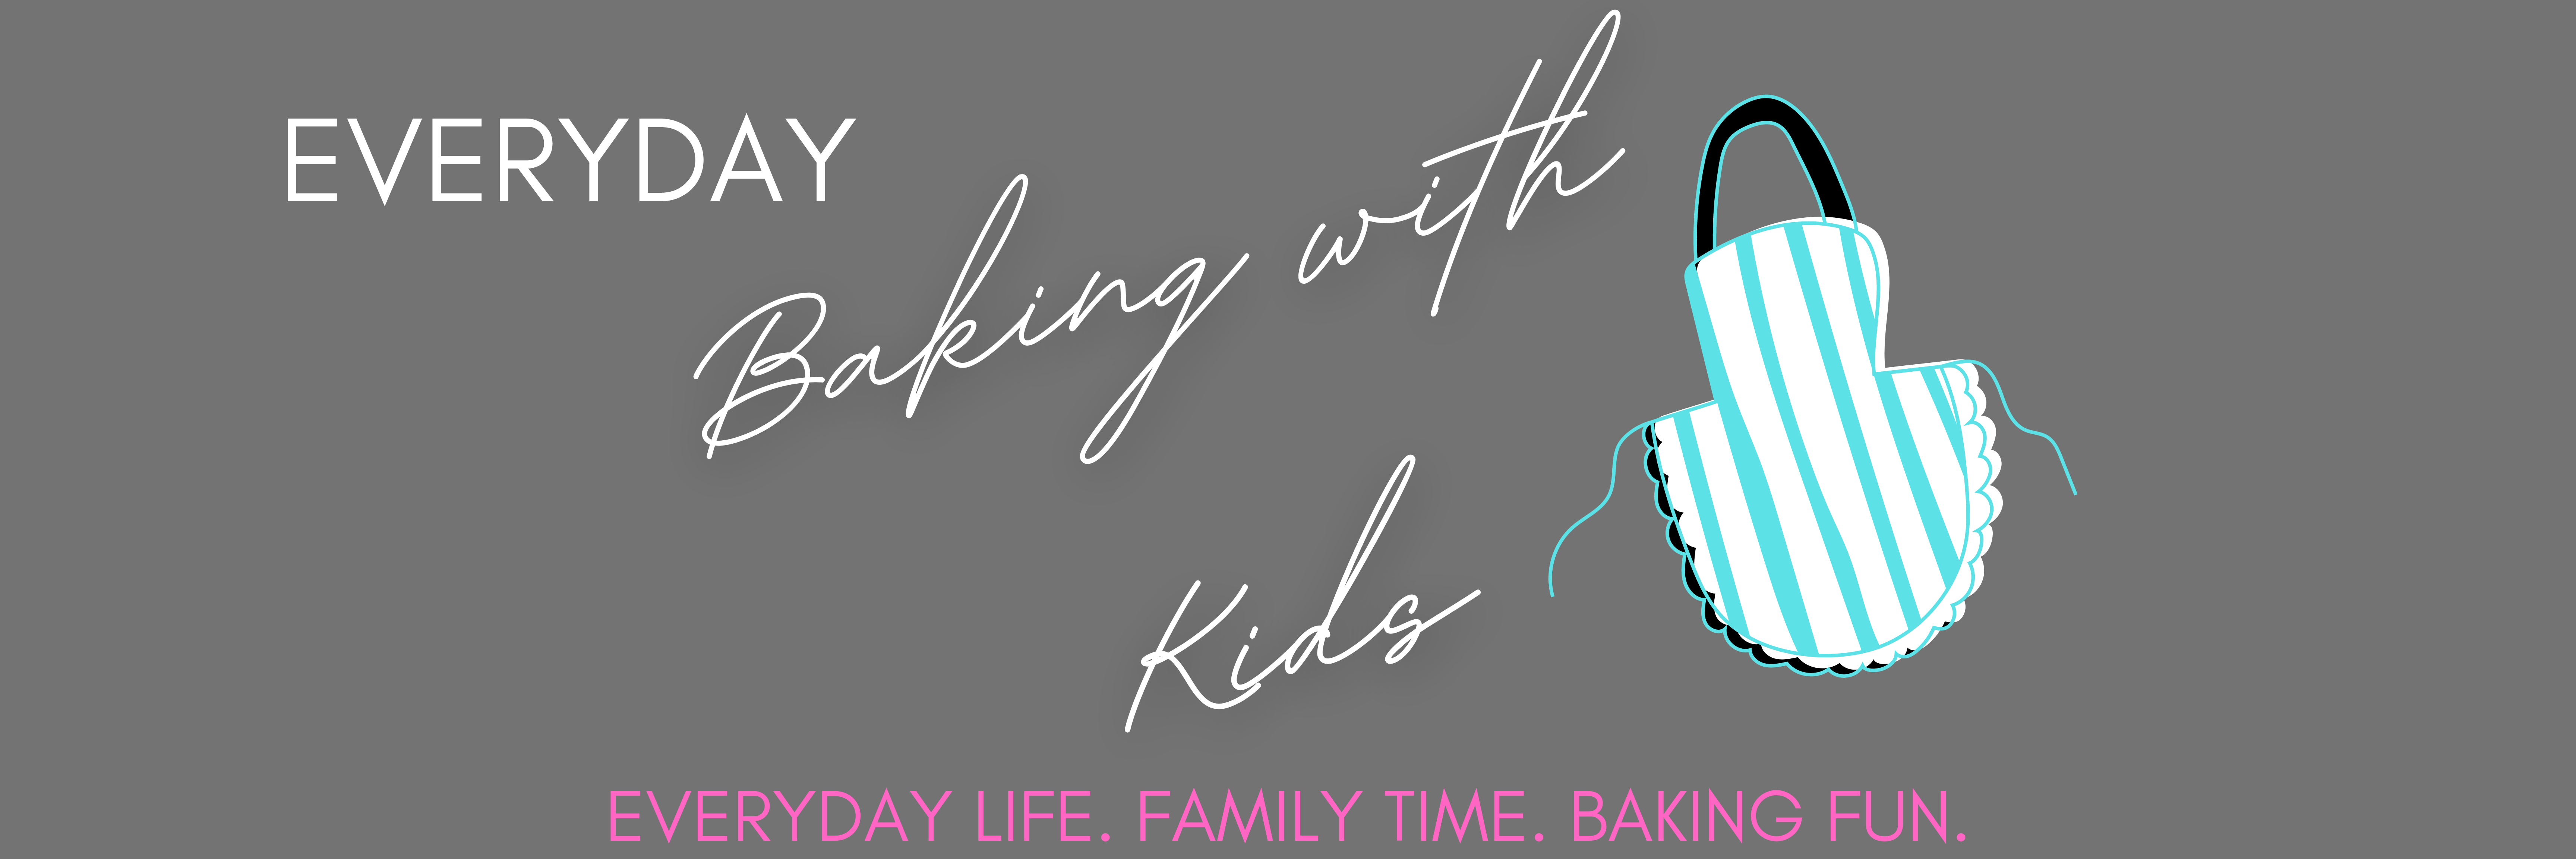 Everyday Baking with Kids